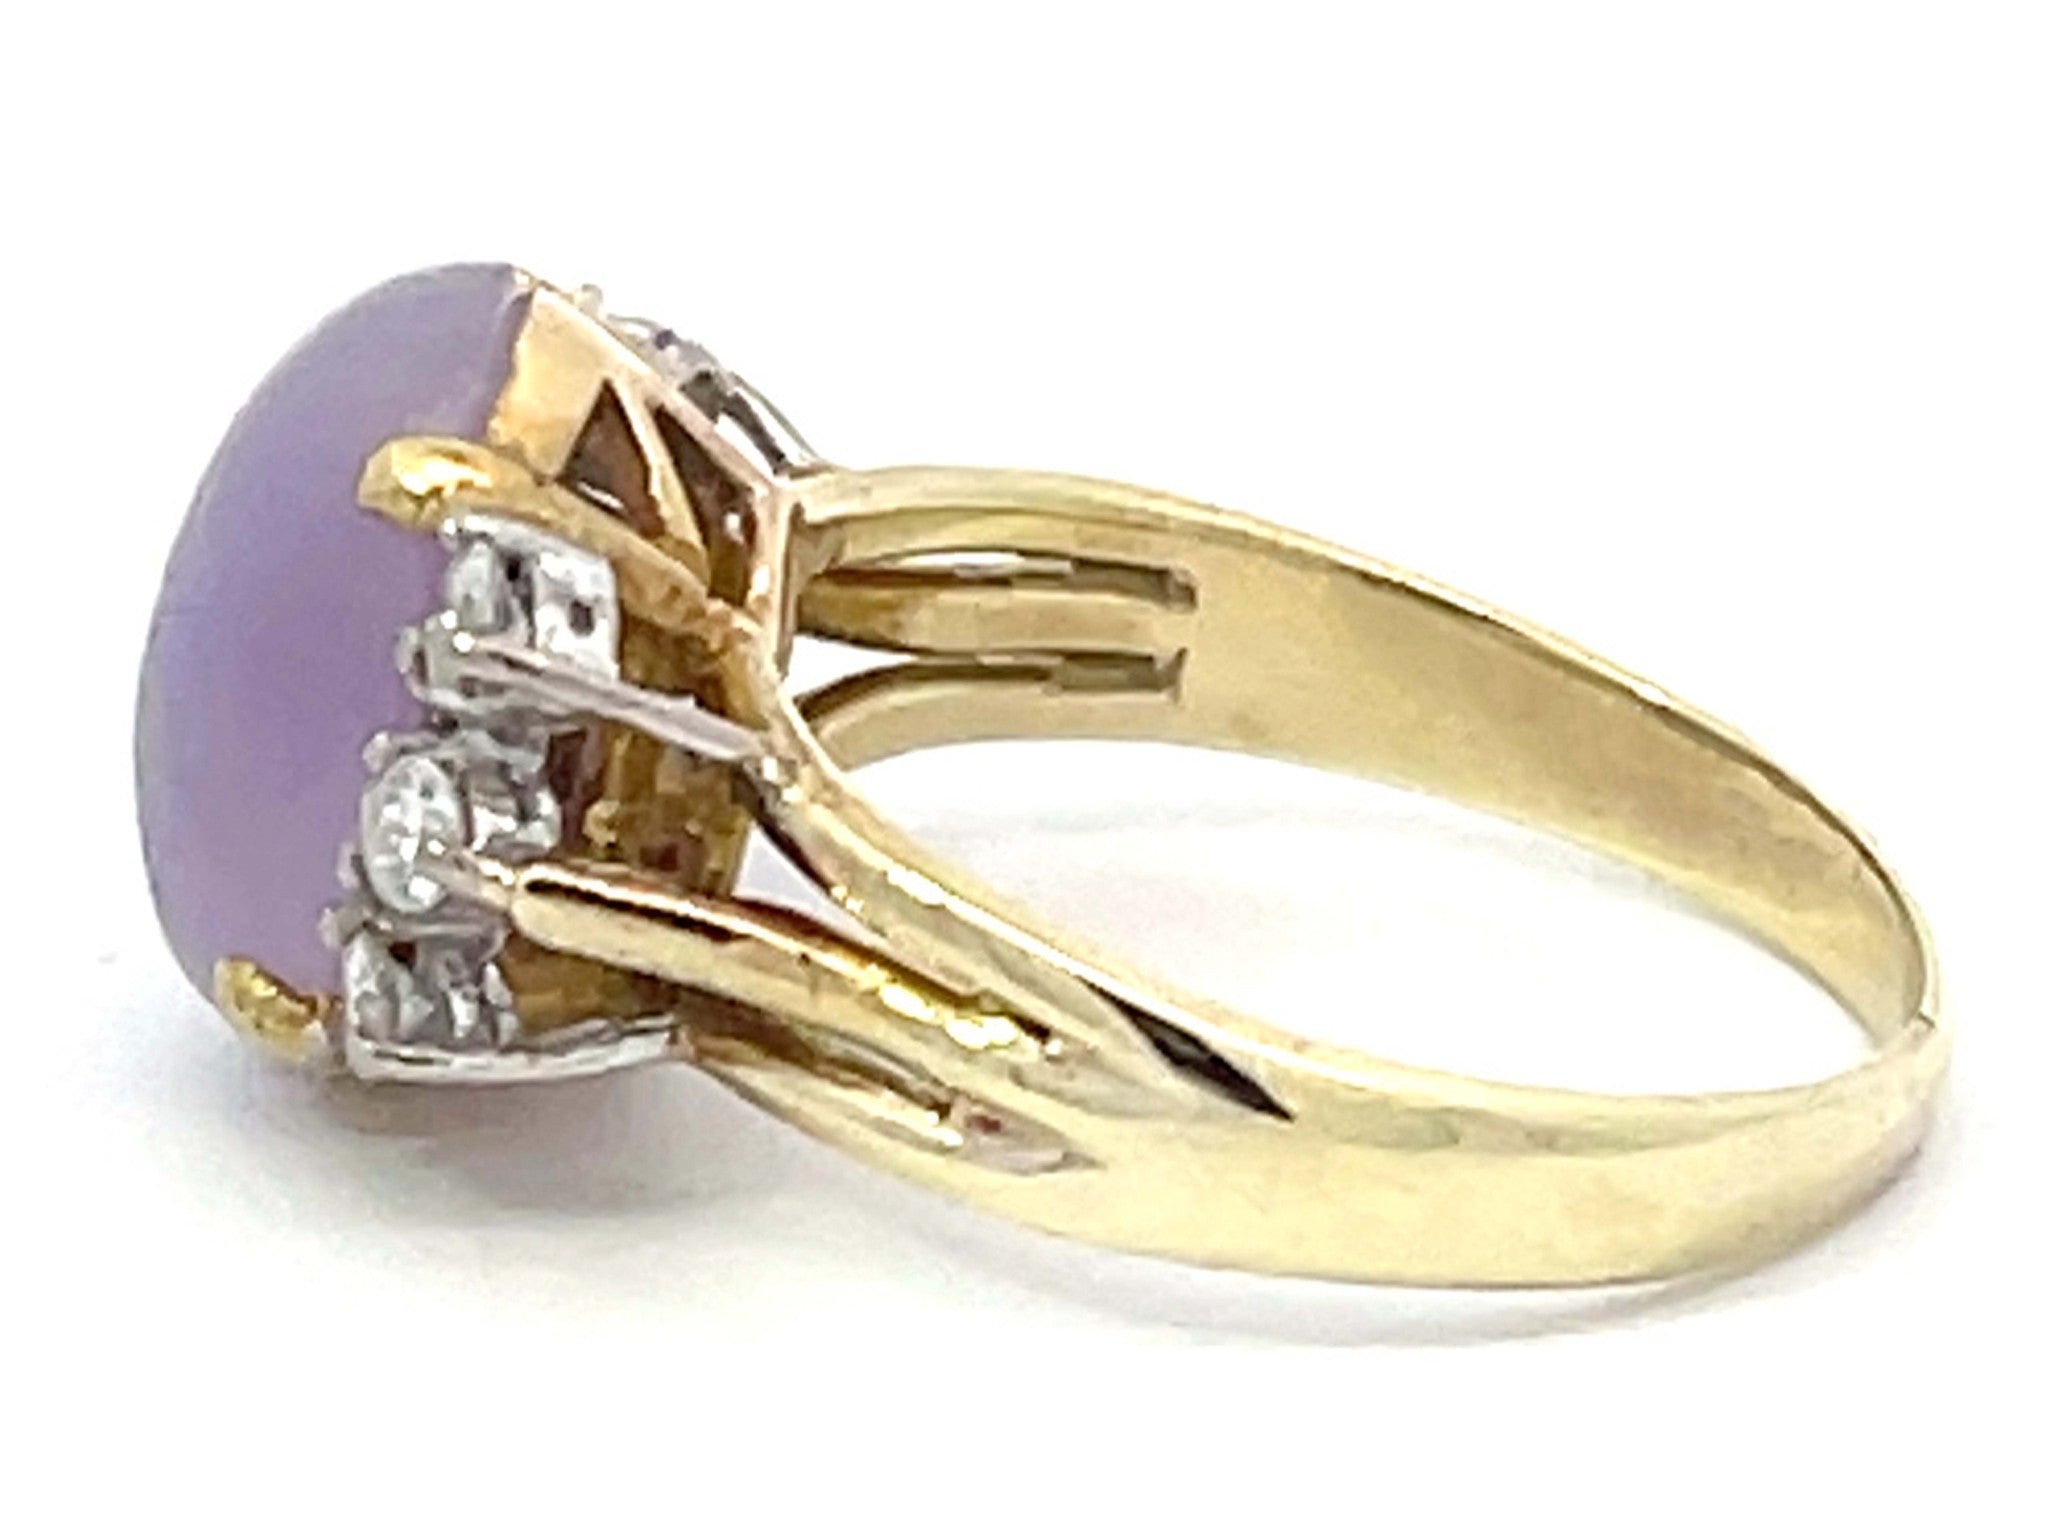 Lavender Jade and Diamond Ring in 14k Yellow Gold